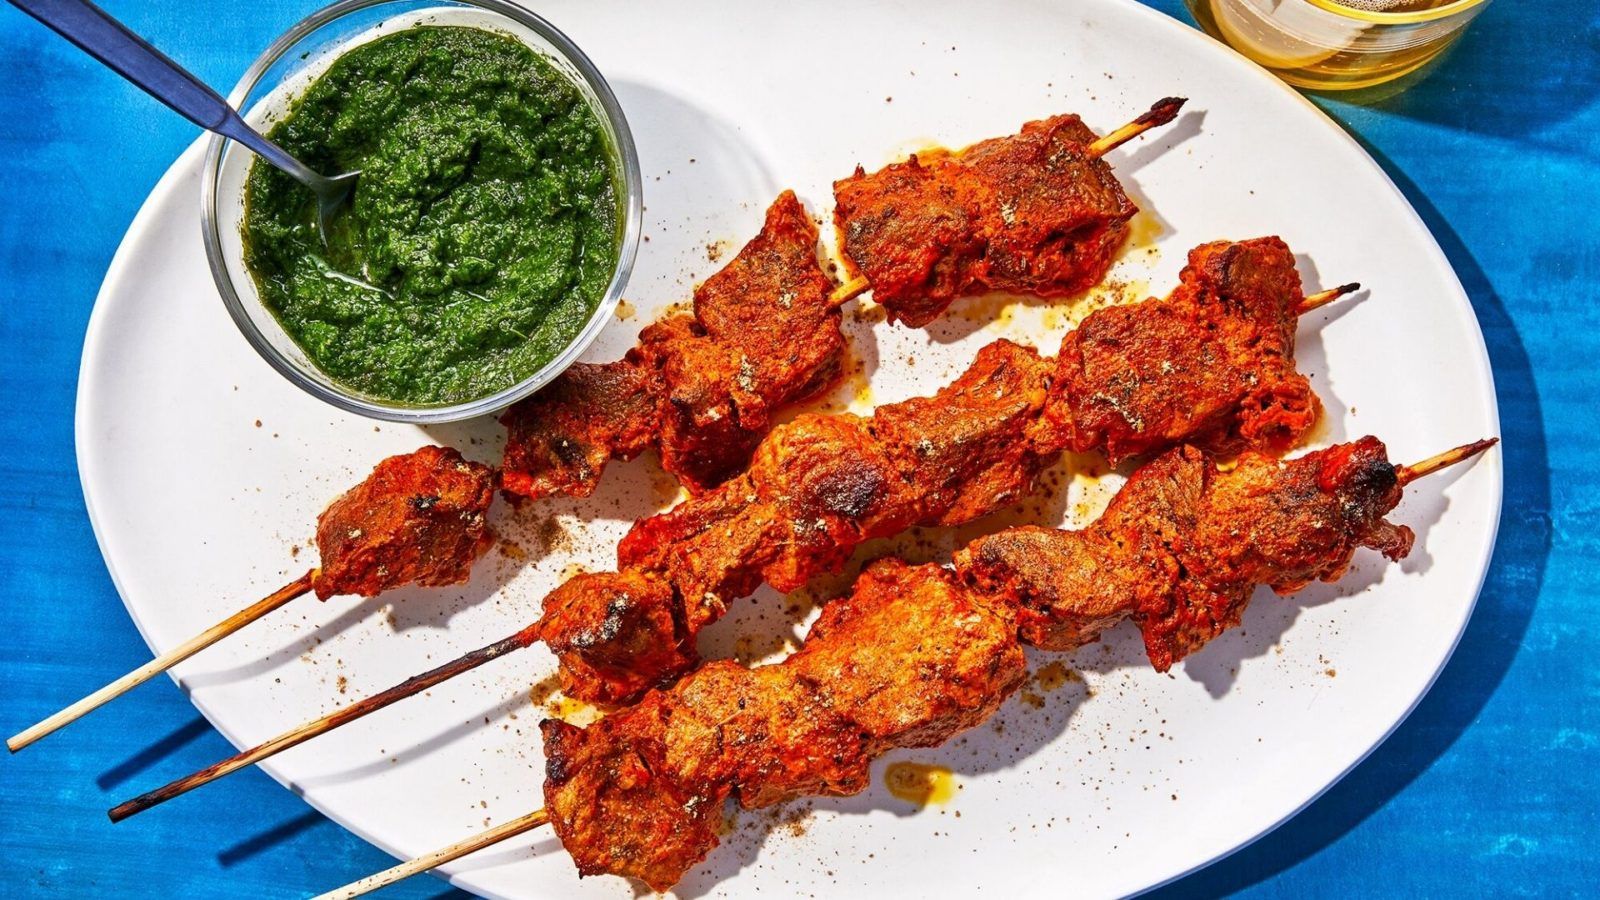 Expert tips on how to make mind blowing kebabs at home